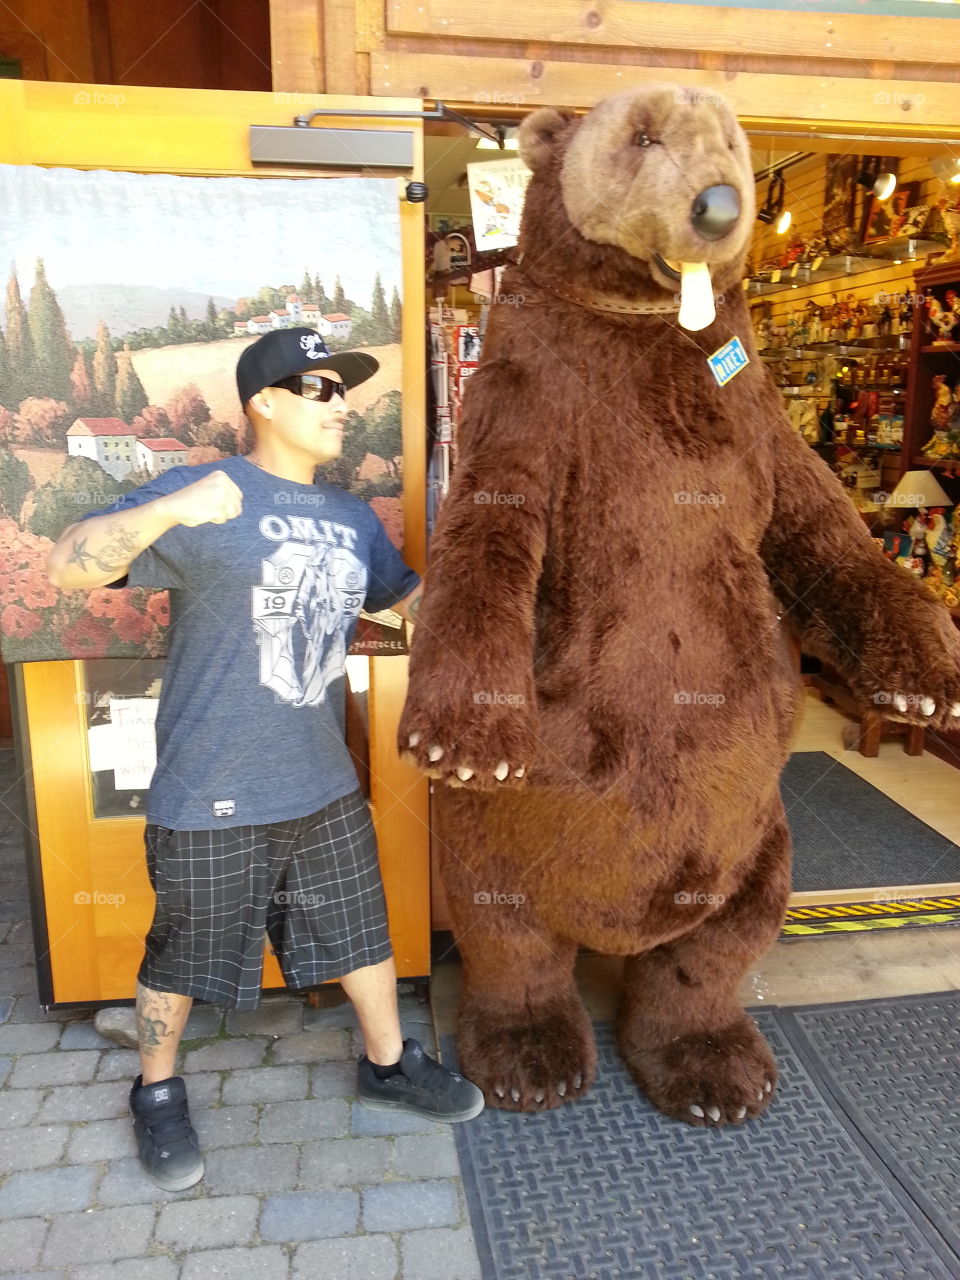 Fighting a bear. me playing around in South Lake Tahoe with a stuffed bear